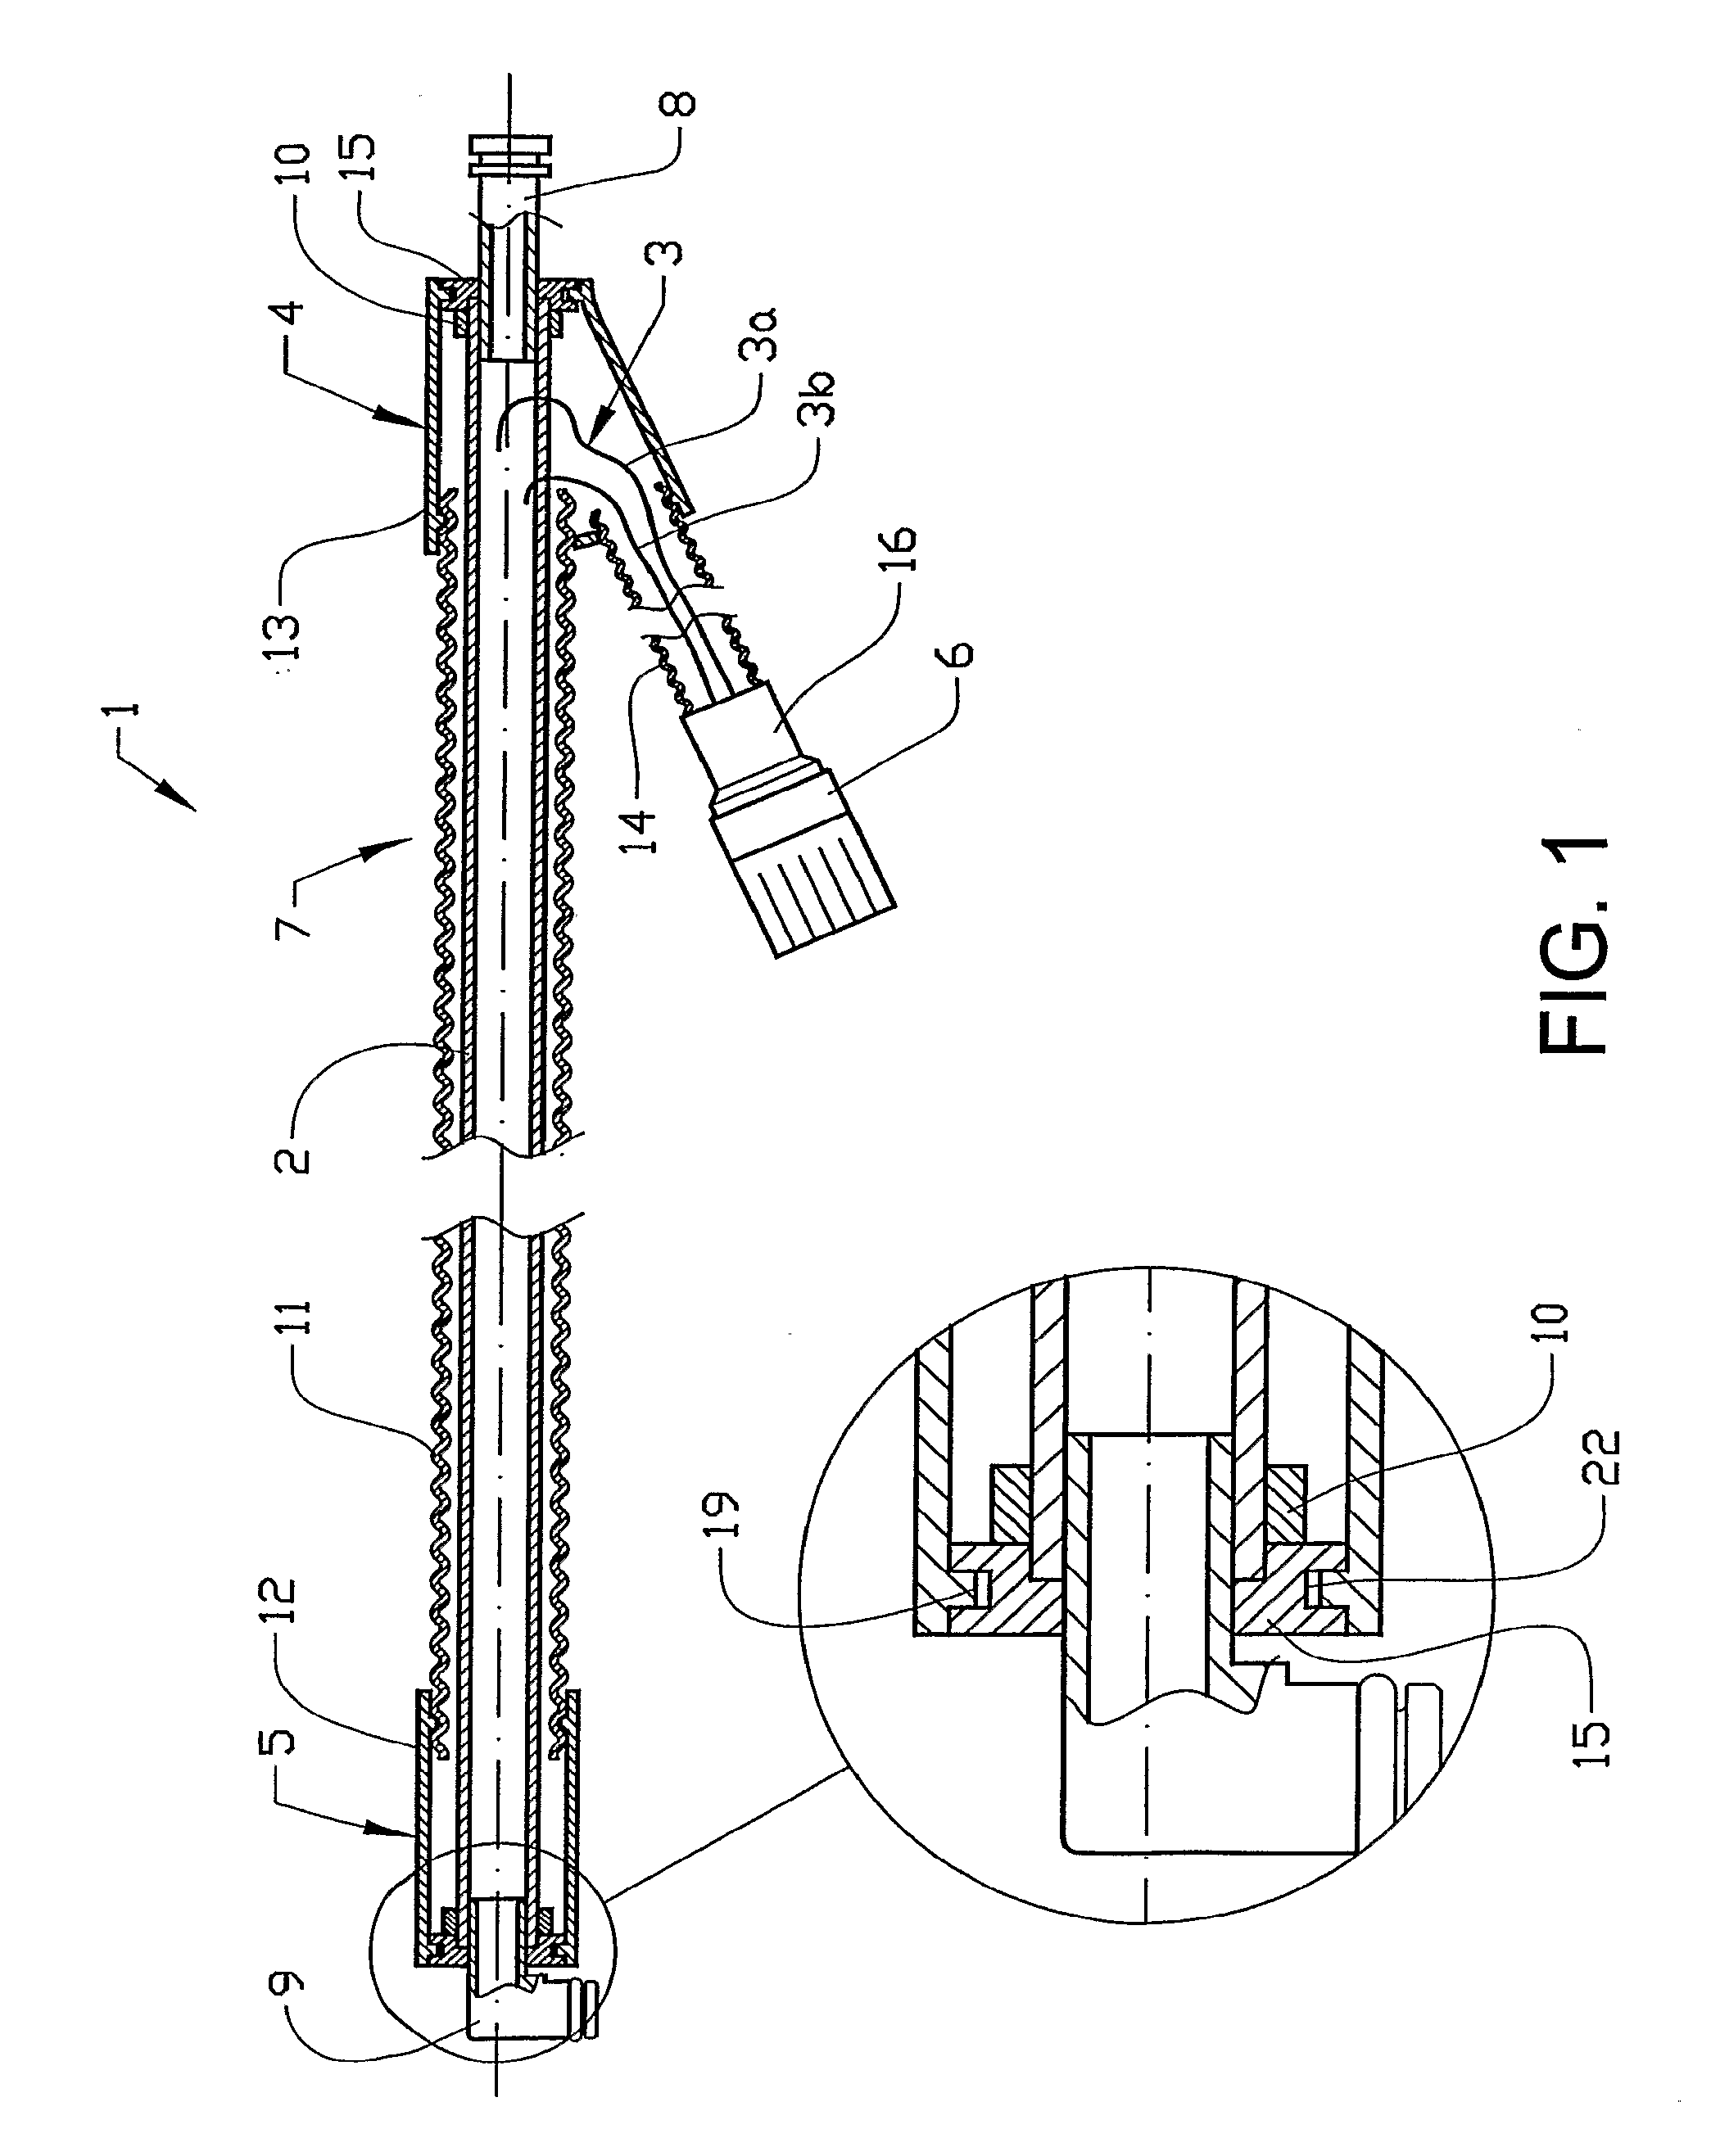 Electrically heatable cabling